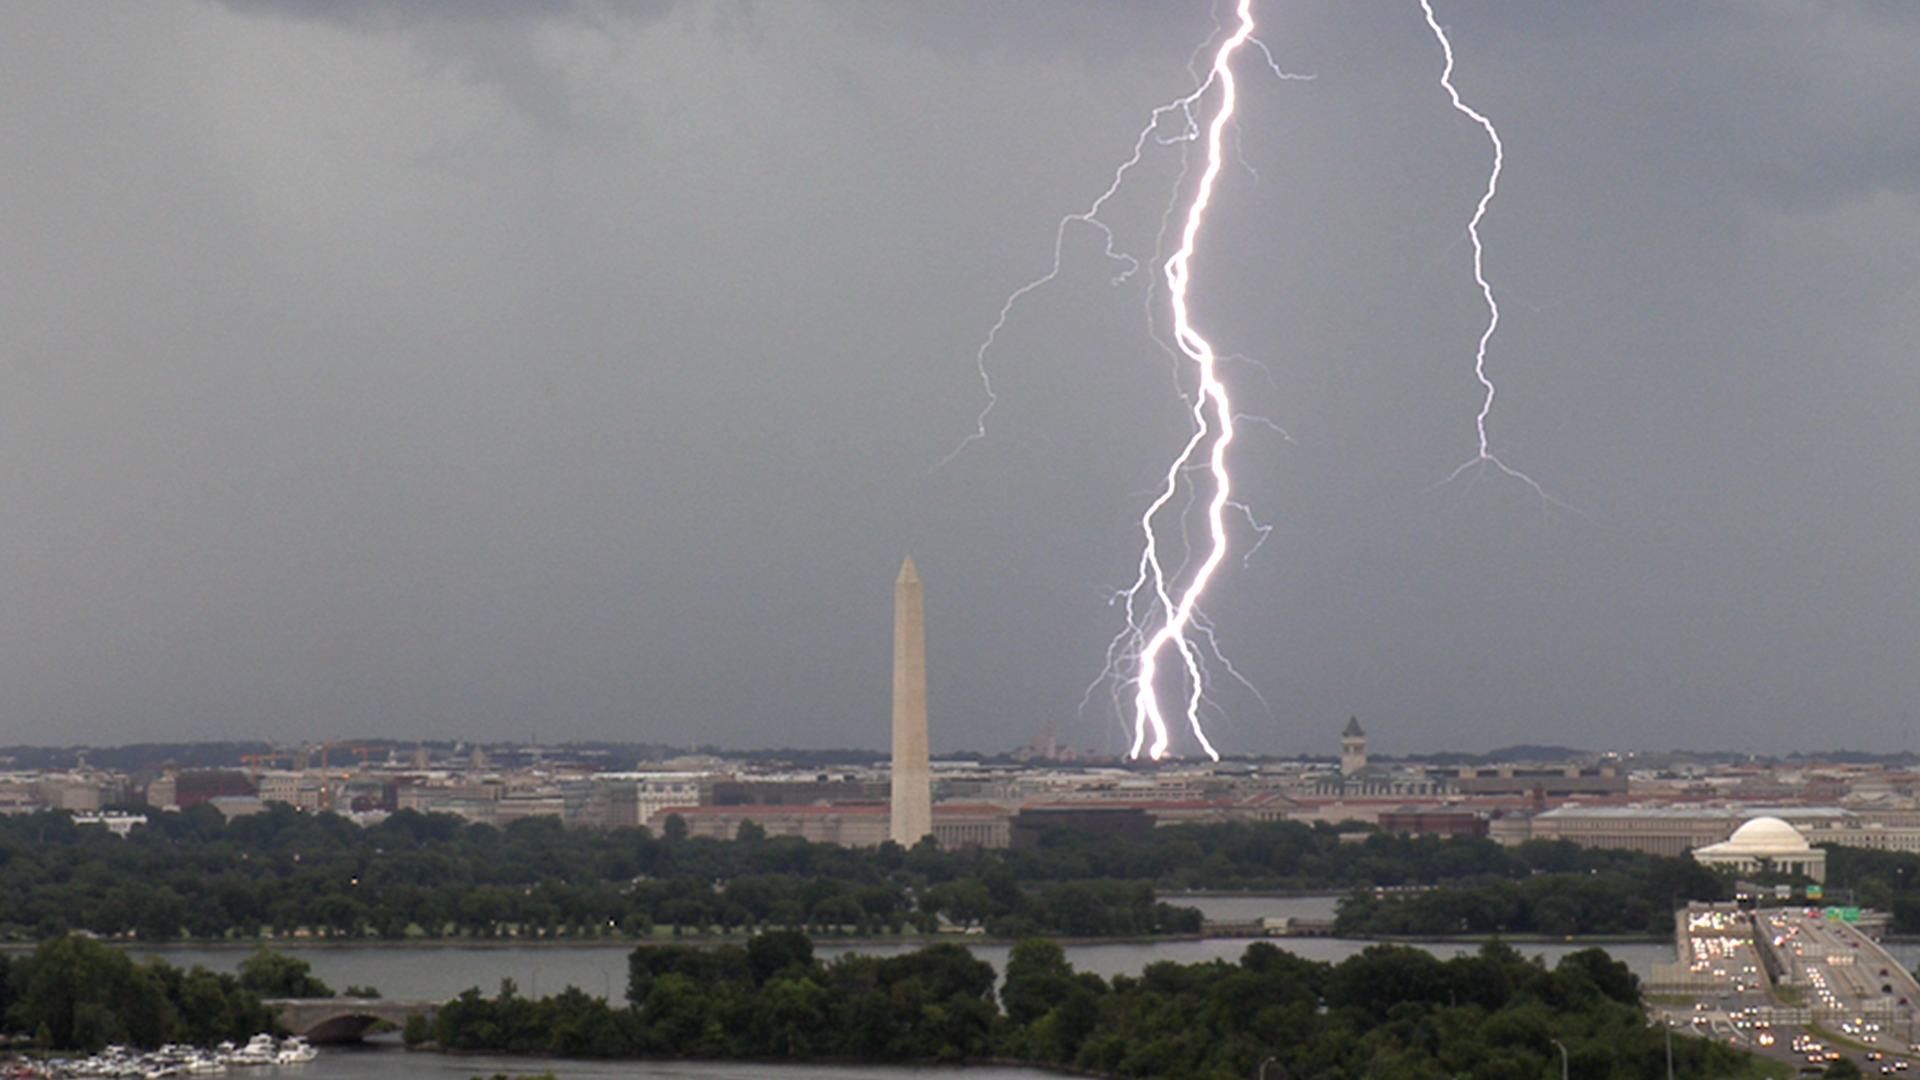 Surprising facts and safety tips for lightning and thunder - The Washington  Post